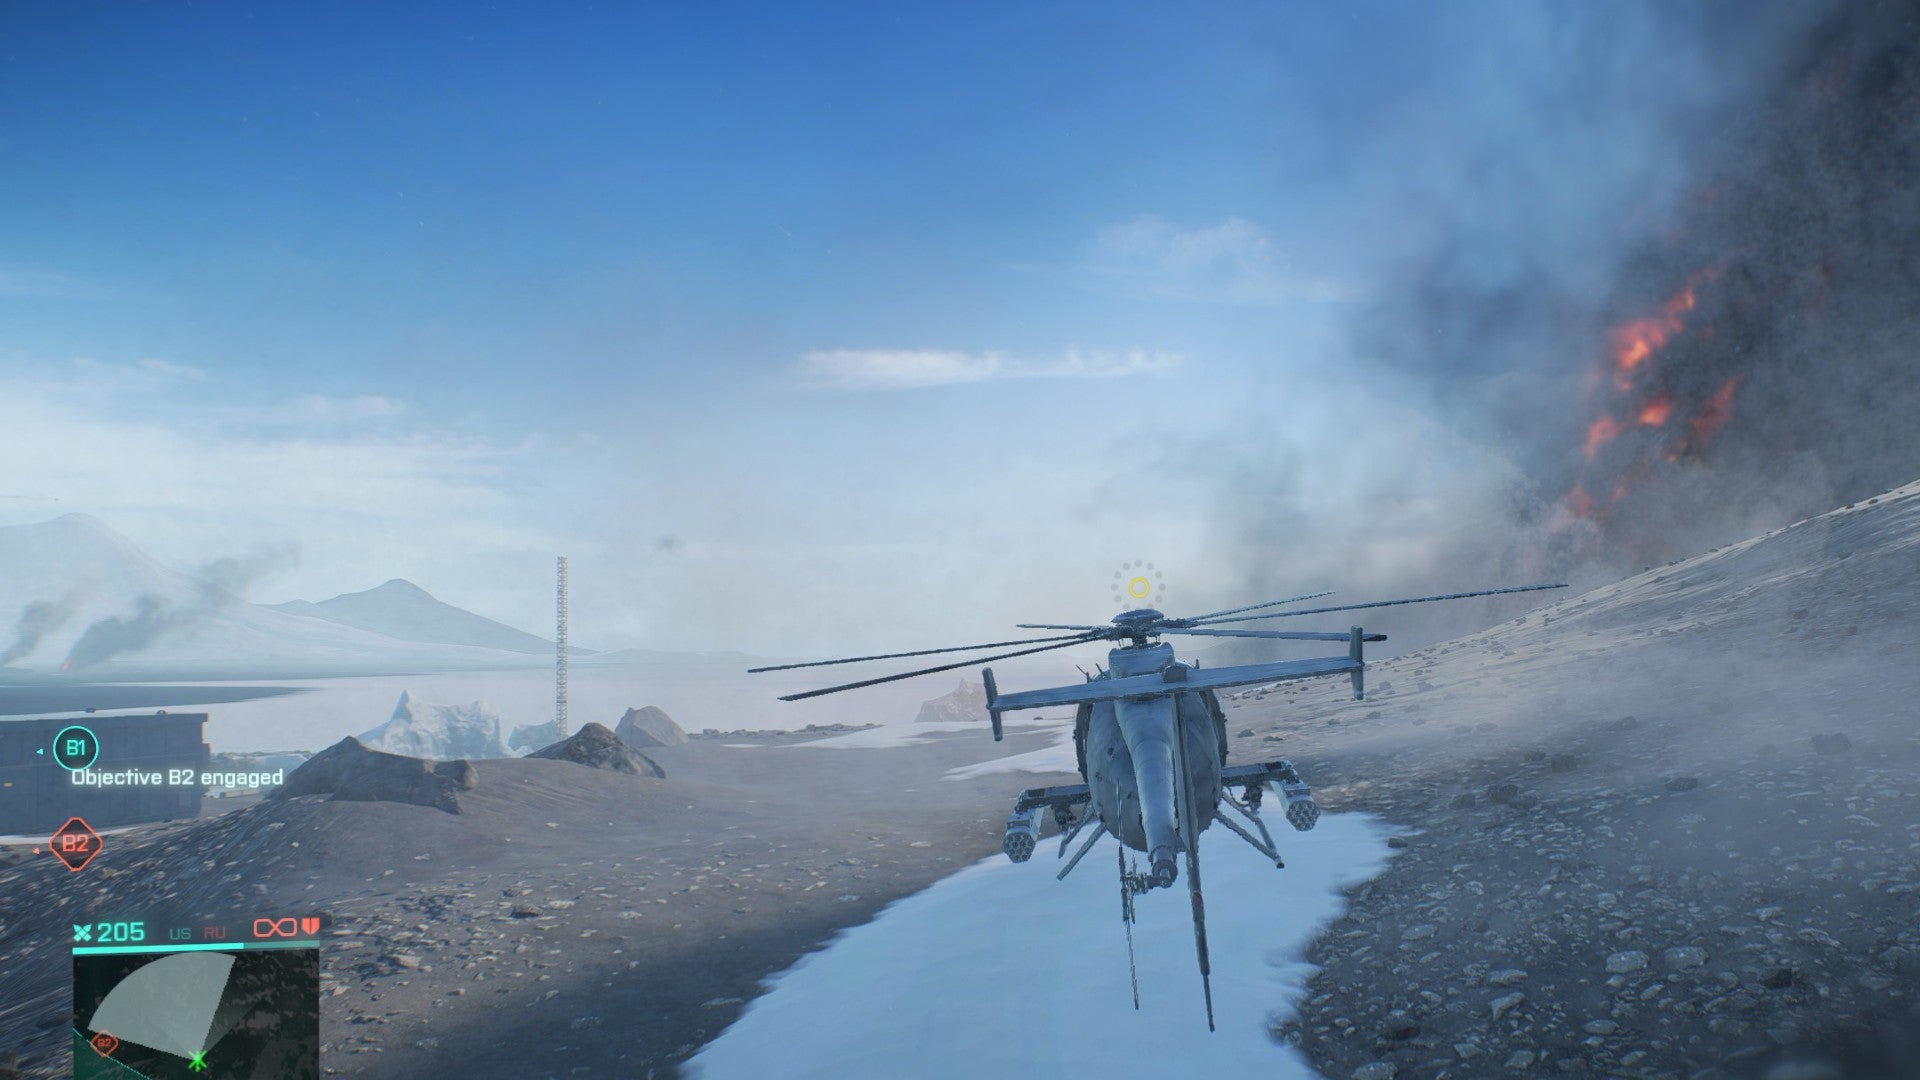 A Nightbird helicopter on land in Battlefield 2042. Fire and smoke are in the background, while the chopper sits on a snowy path in the mountains.